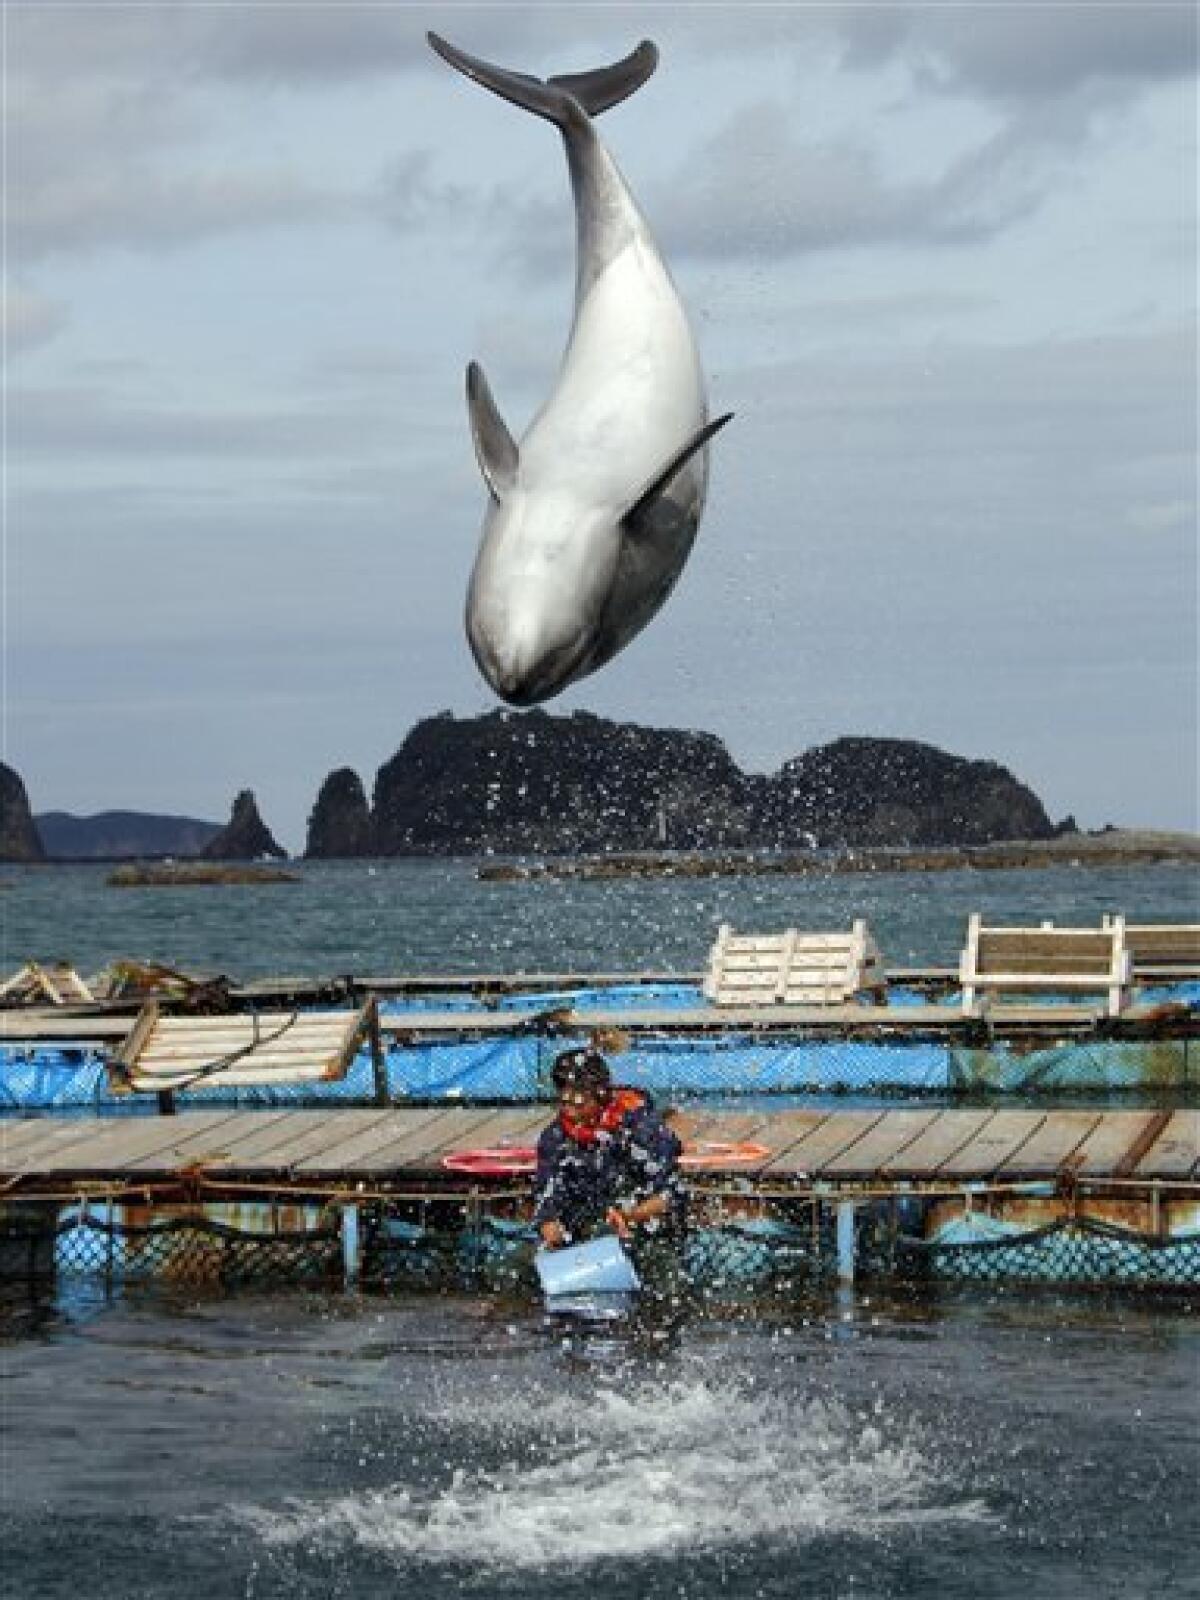 A dolphin demonstrates a flip at a dolphin pool in Taiji, southwestern Japan, where visitors can play with the animals Monday, March 8, 2010. The Japanese fishing village featured in "The Cove," which won an Oscar for best documentary, defended Monday its practice of hunting dolphins as a part of its tradition. Residents of this remote village nestled on the rocky coast expressed disgust at the covertly filmed movie, which they said distorted the truth, though few acknowledged seeing it in its entirety. (AP Photo/Koji Sasahara)